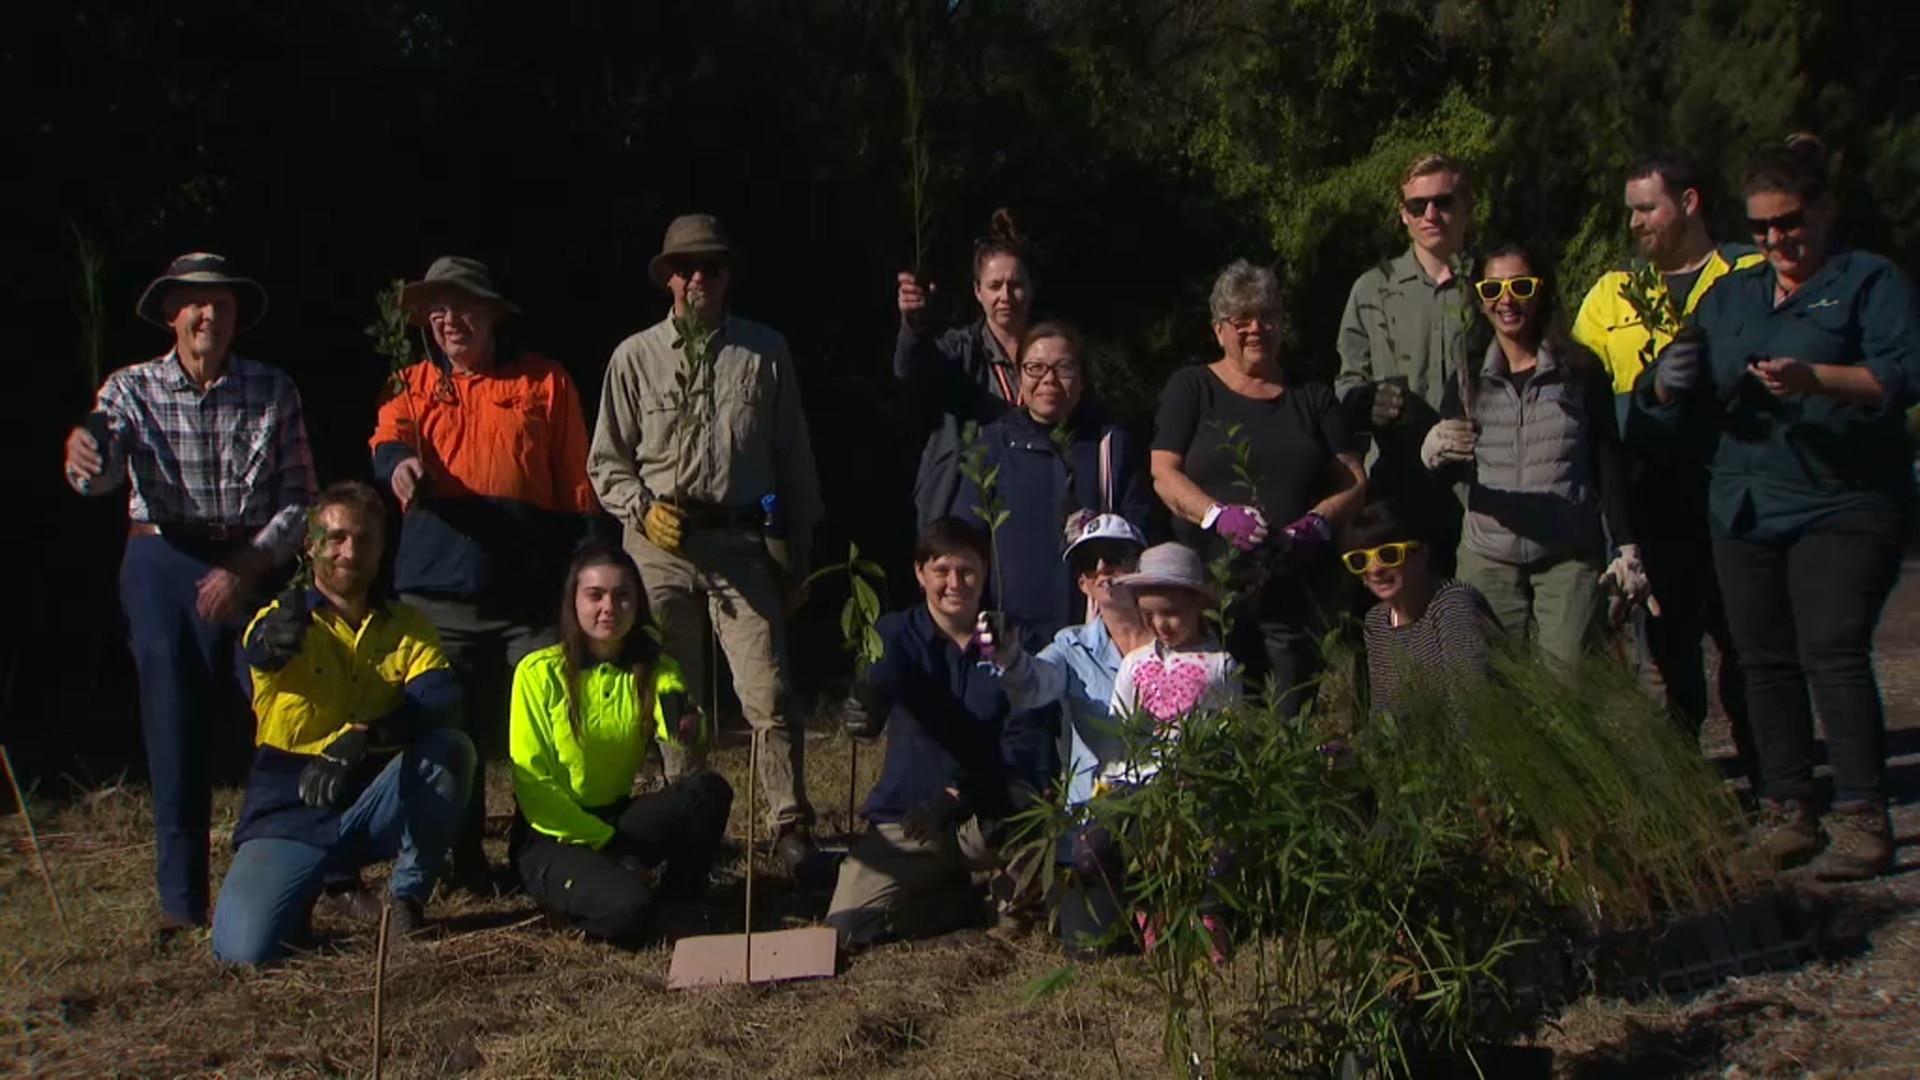 Tree planting events were held across Australia to mark World Environment Day.